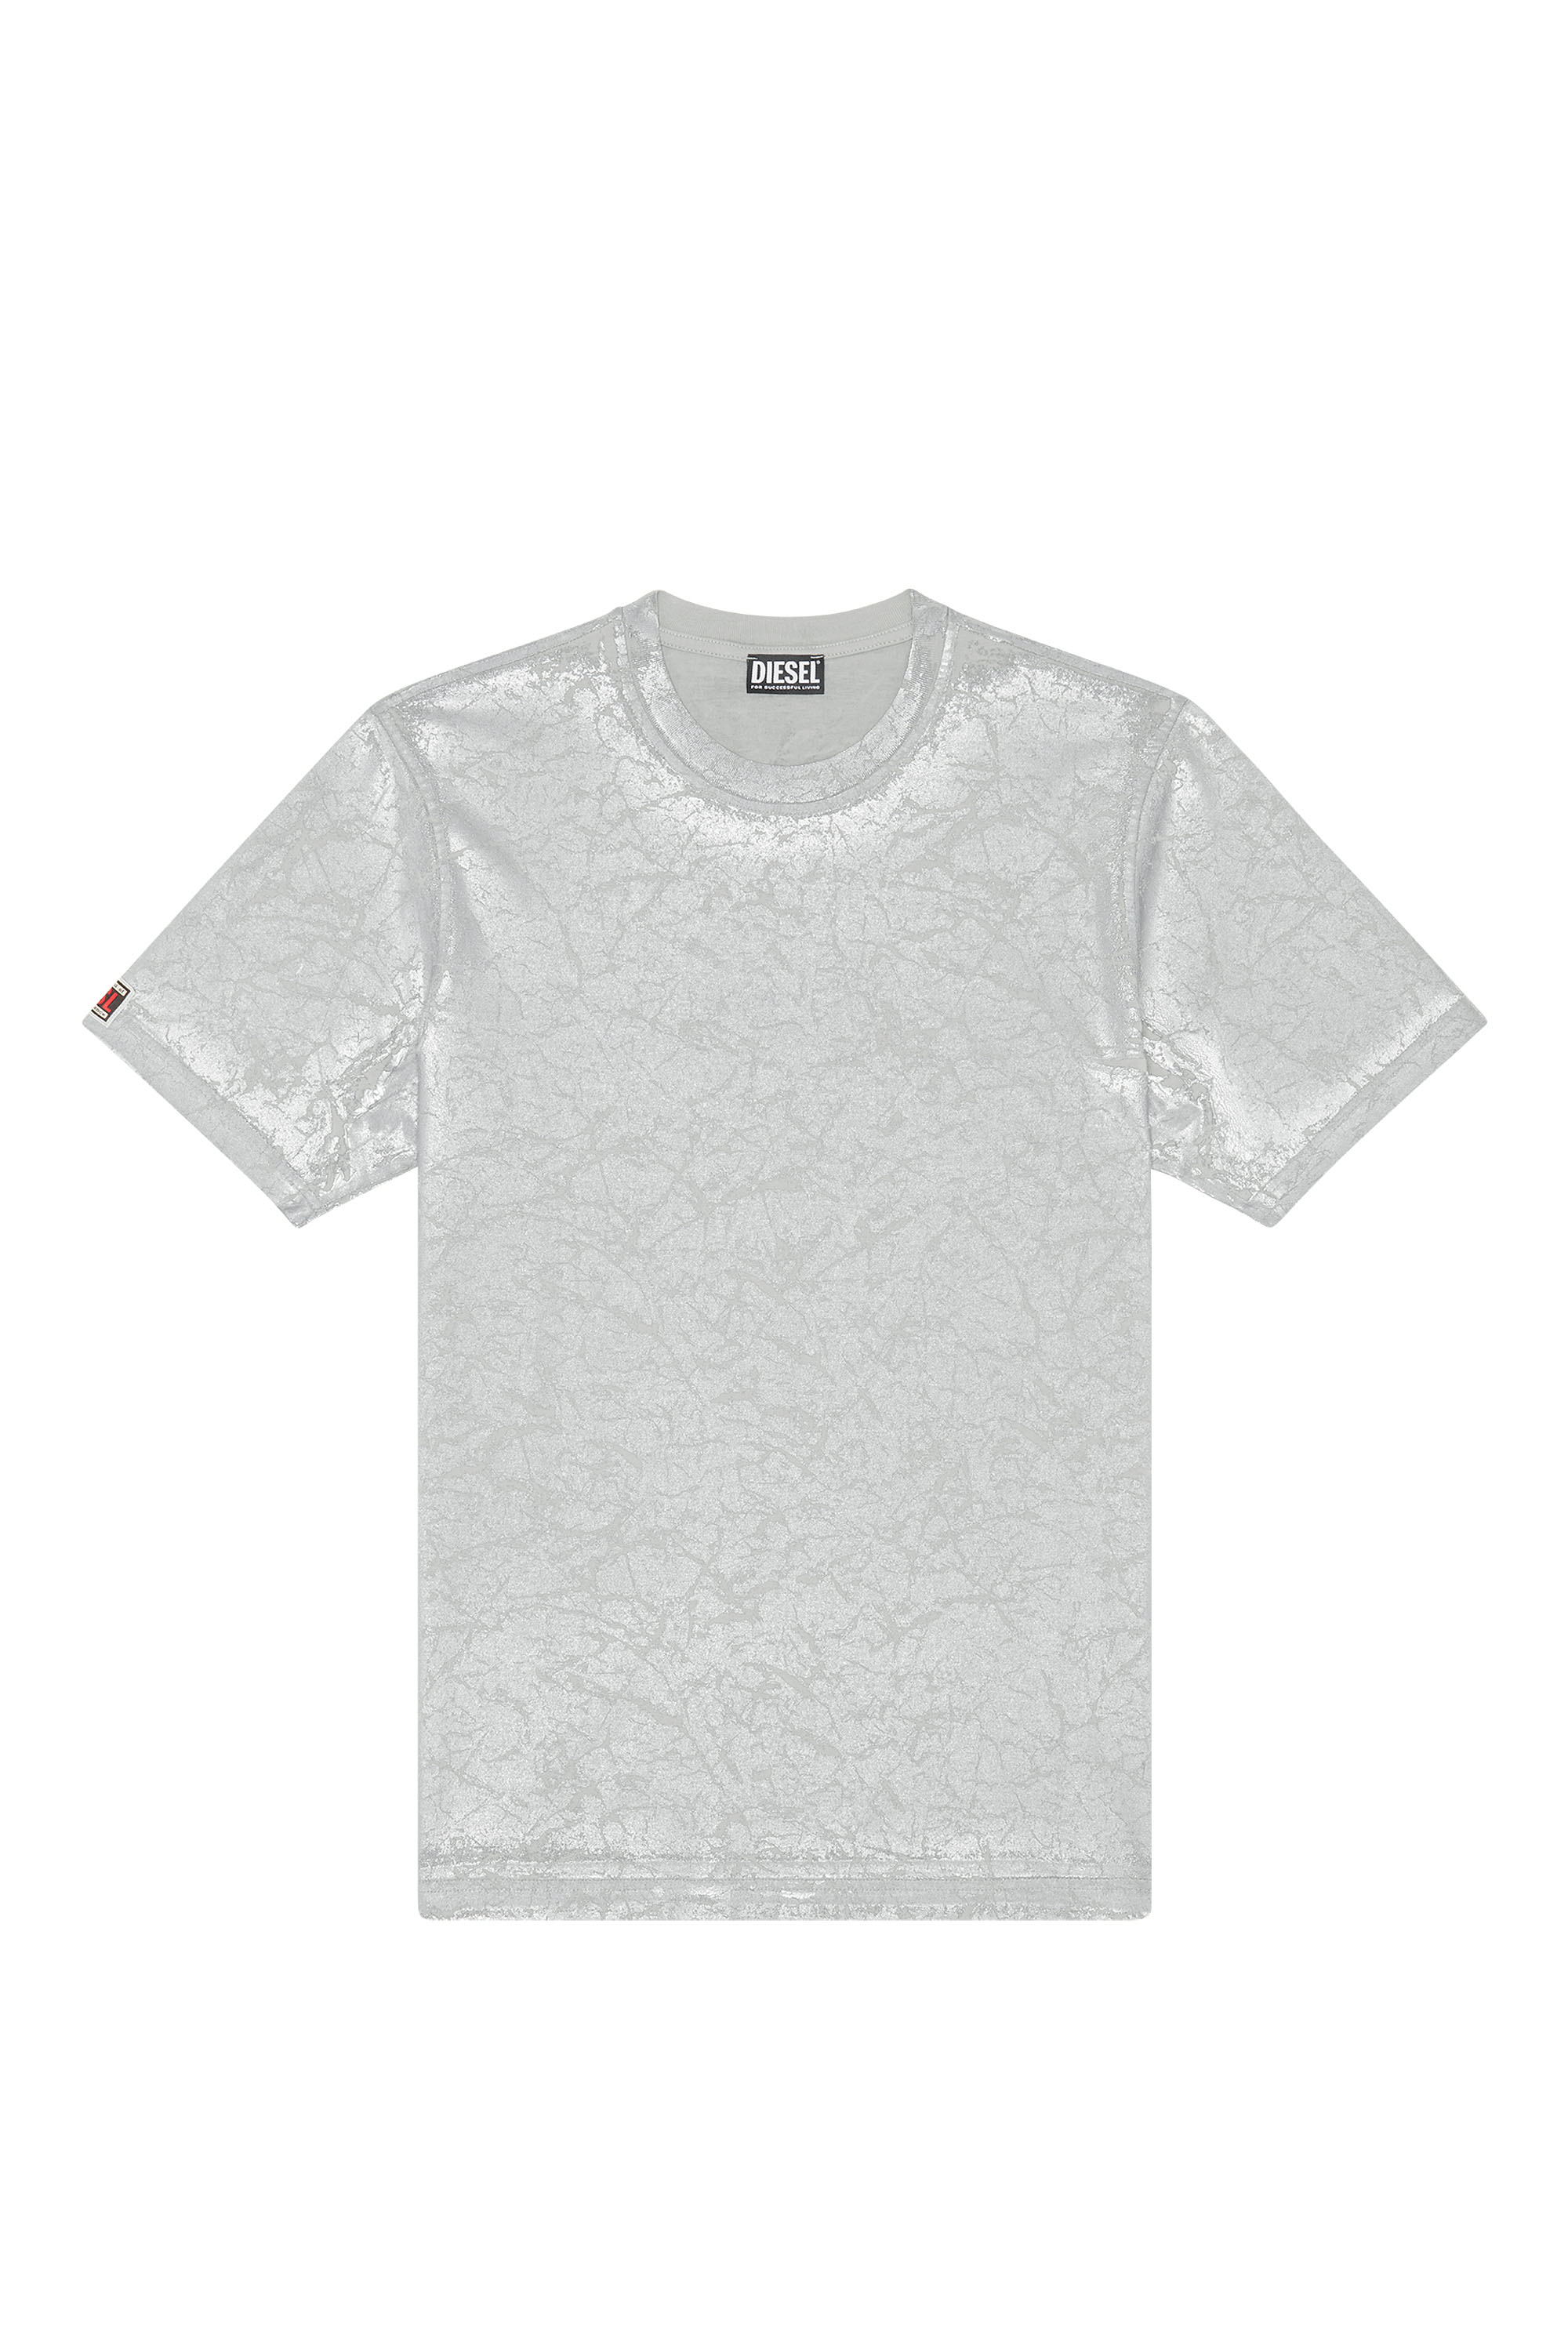 T-JUST-RAW, Gris - T-Shirts